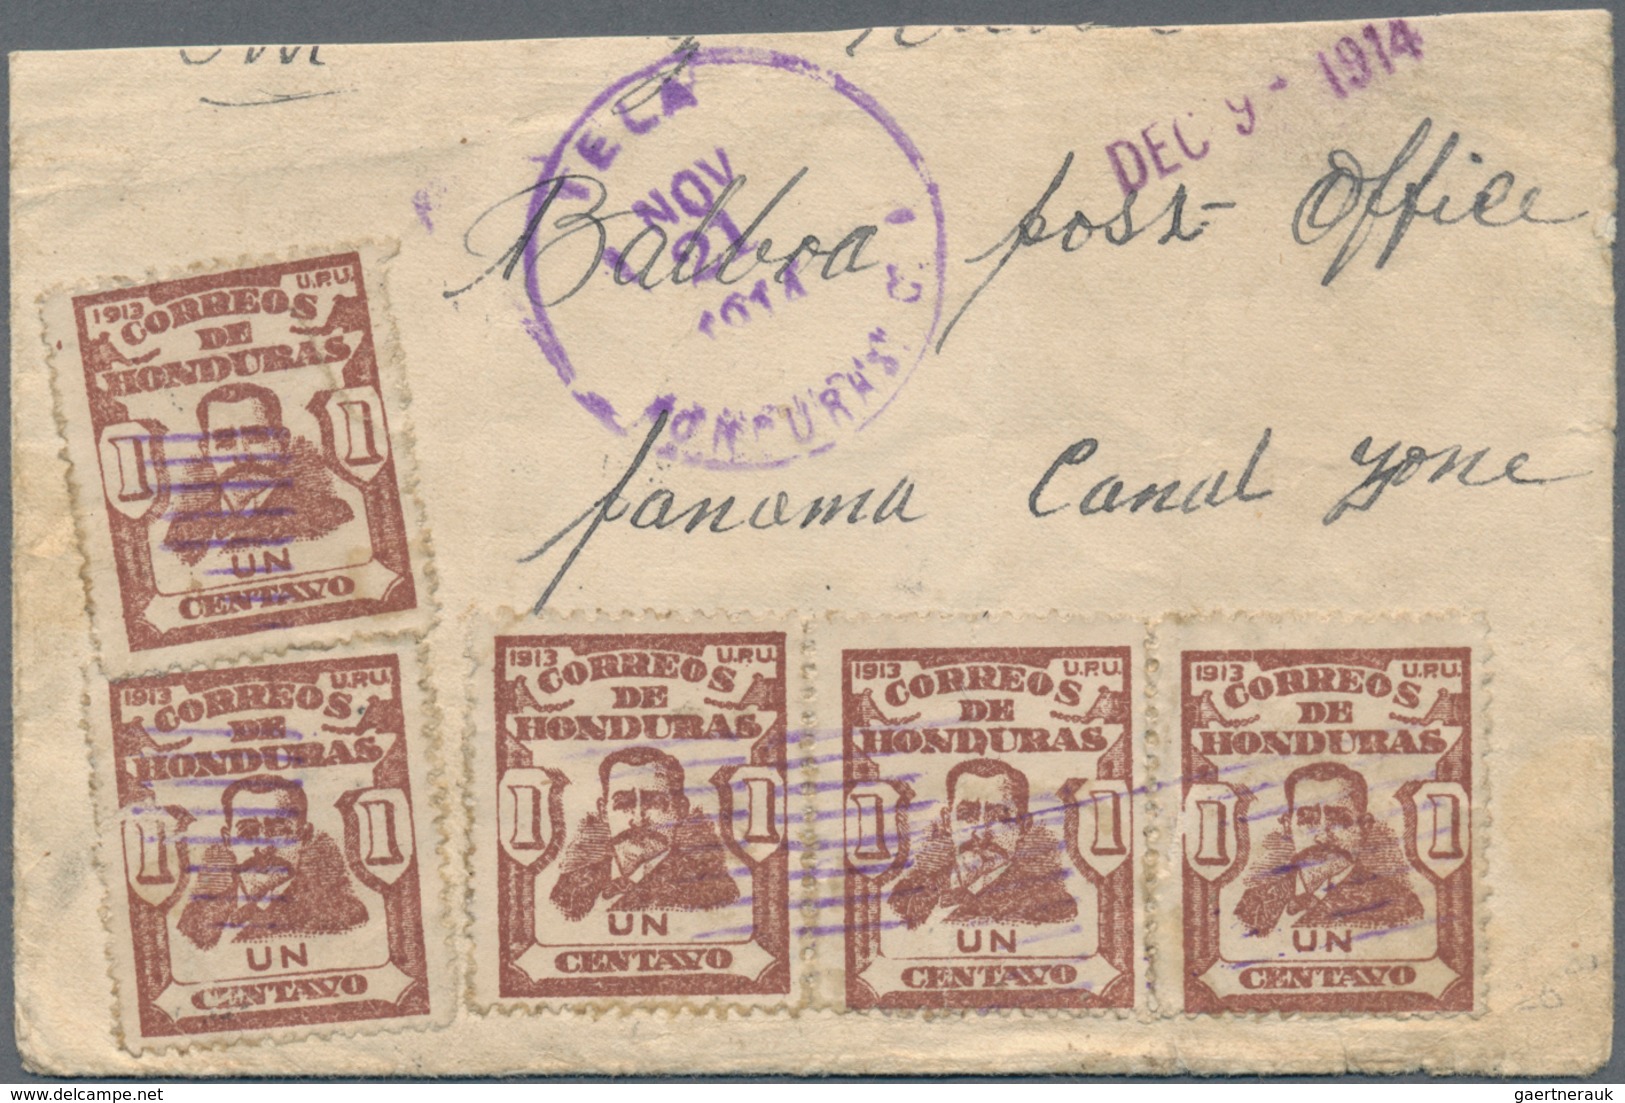 Mittel- und Südamerika: 1900/1950 (ca.), South and Central America, comprehensive holding of covers/